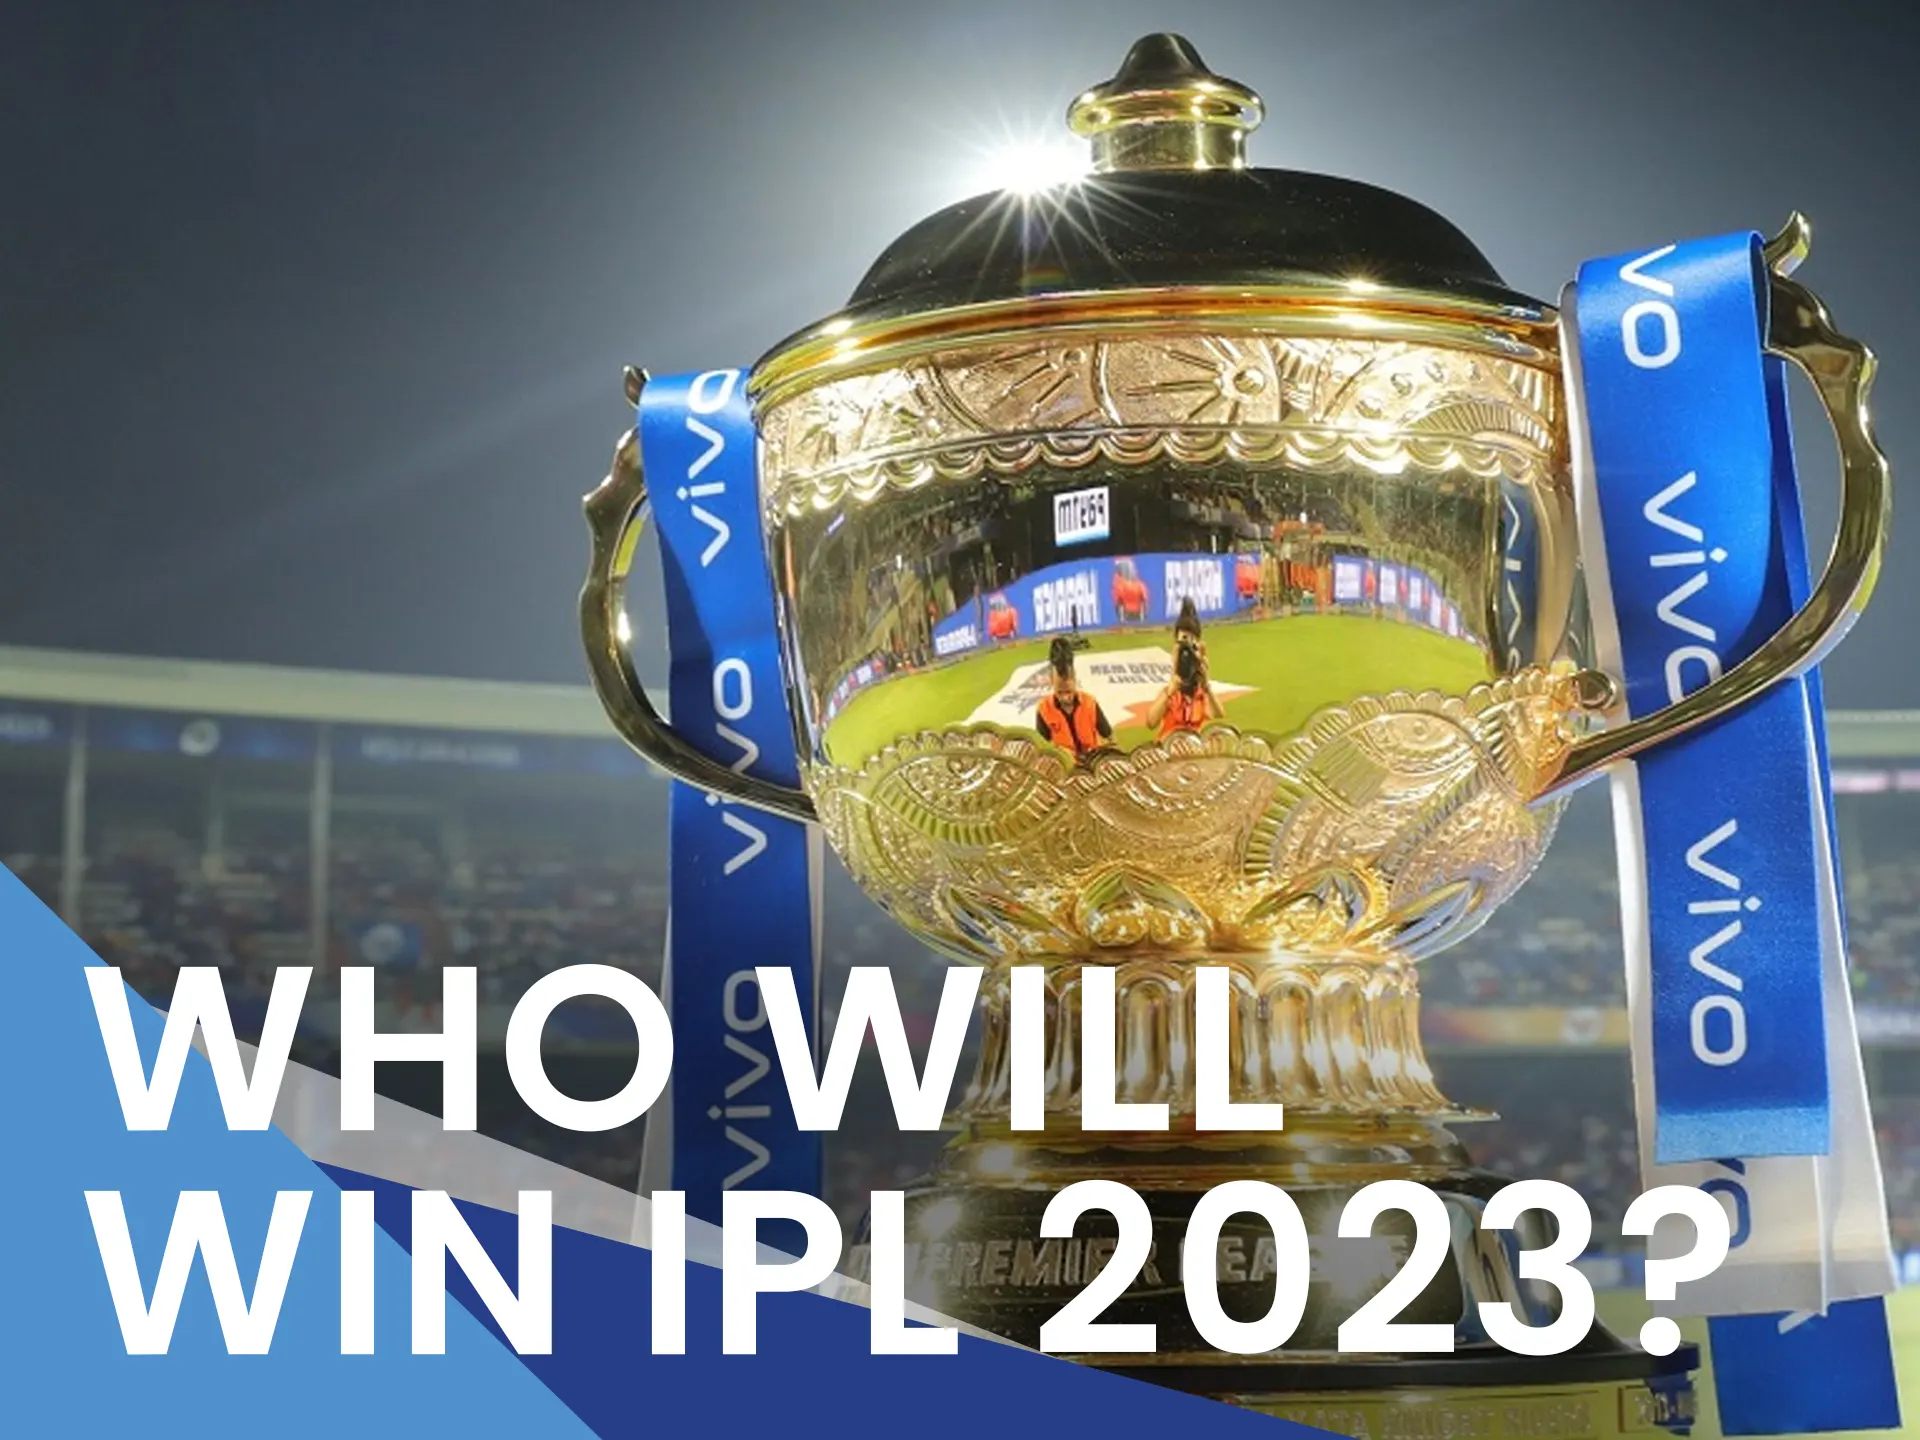 Make single prediction on your favourite IPL team and win biggest amount of money.